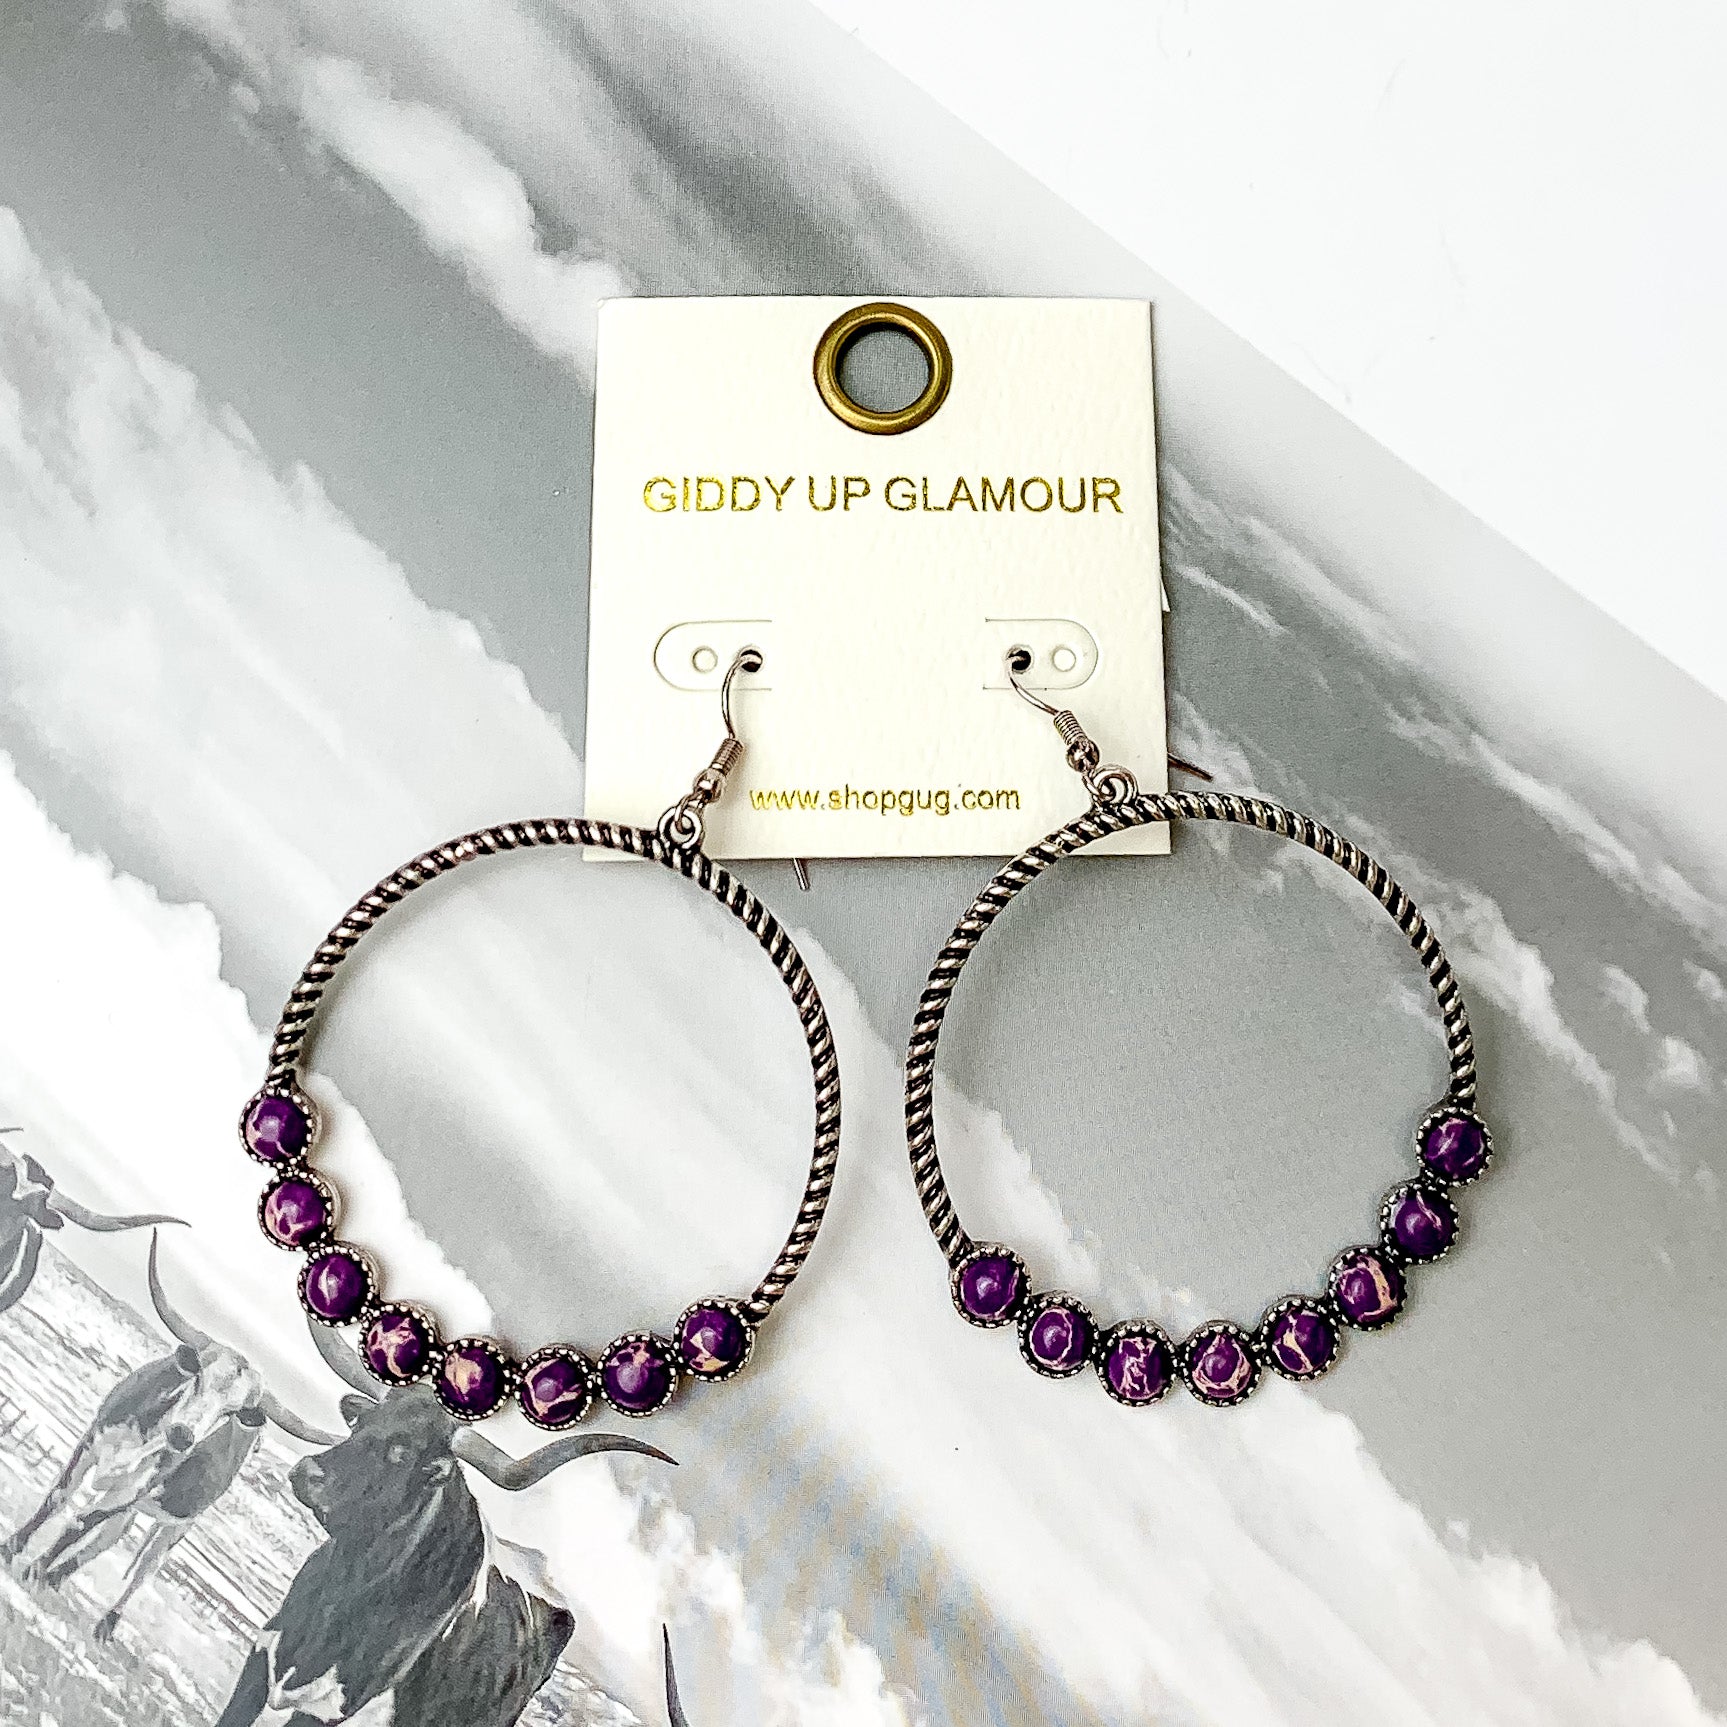 Forever Twisted Hoop Earrings with Stones in Purple. Pictured on a book with a western background behind the earrings.